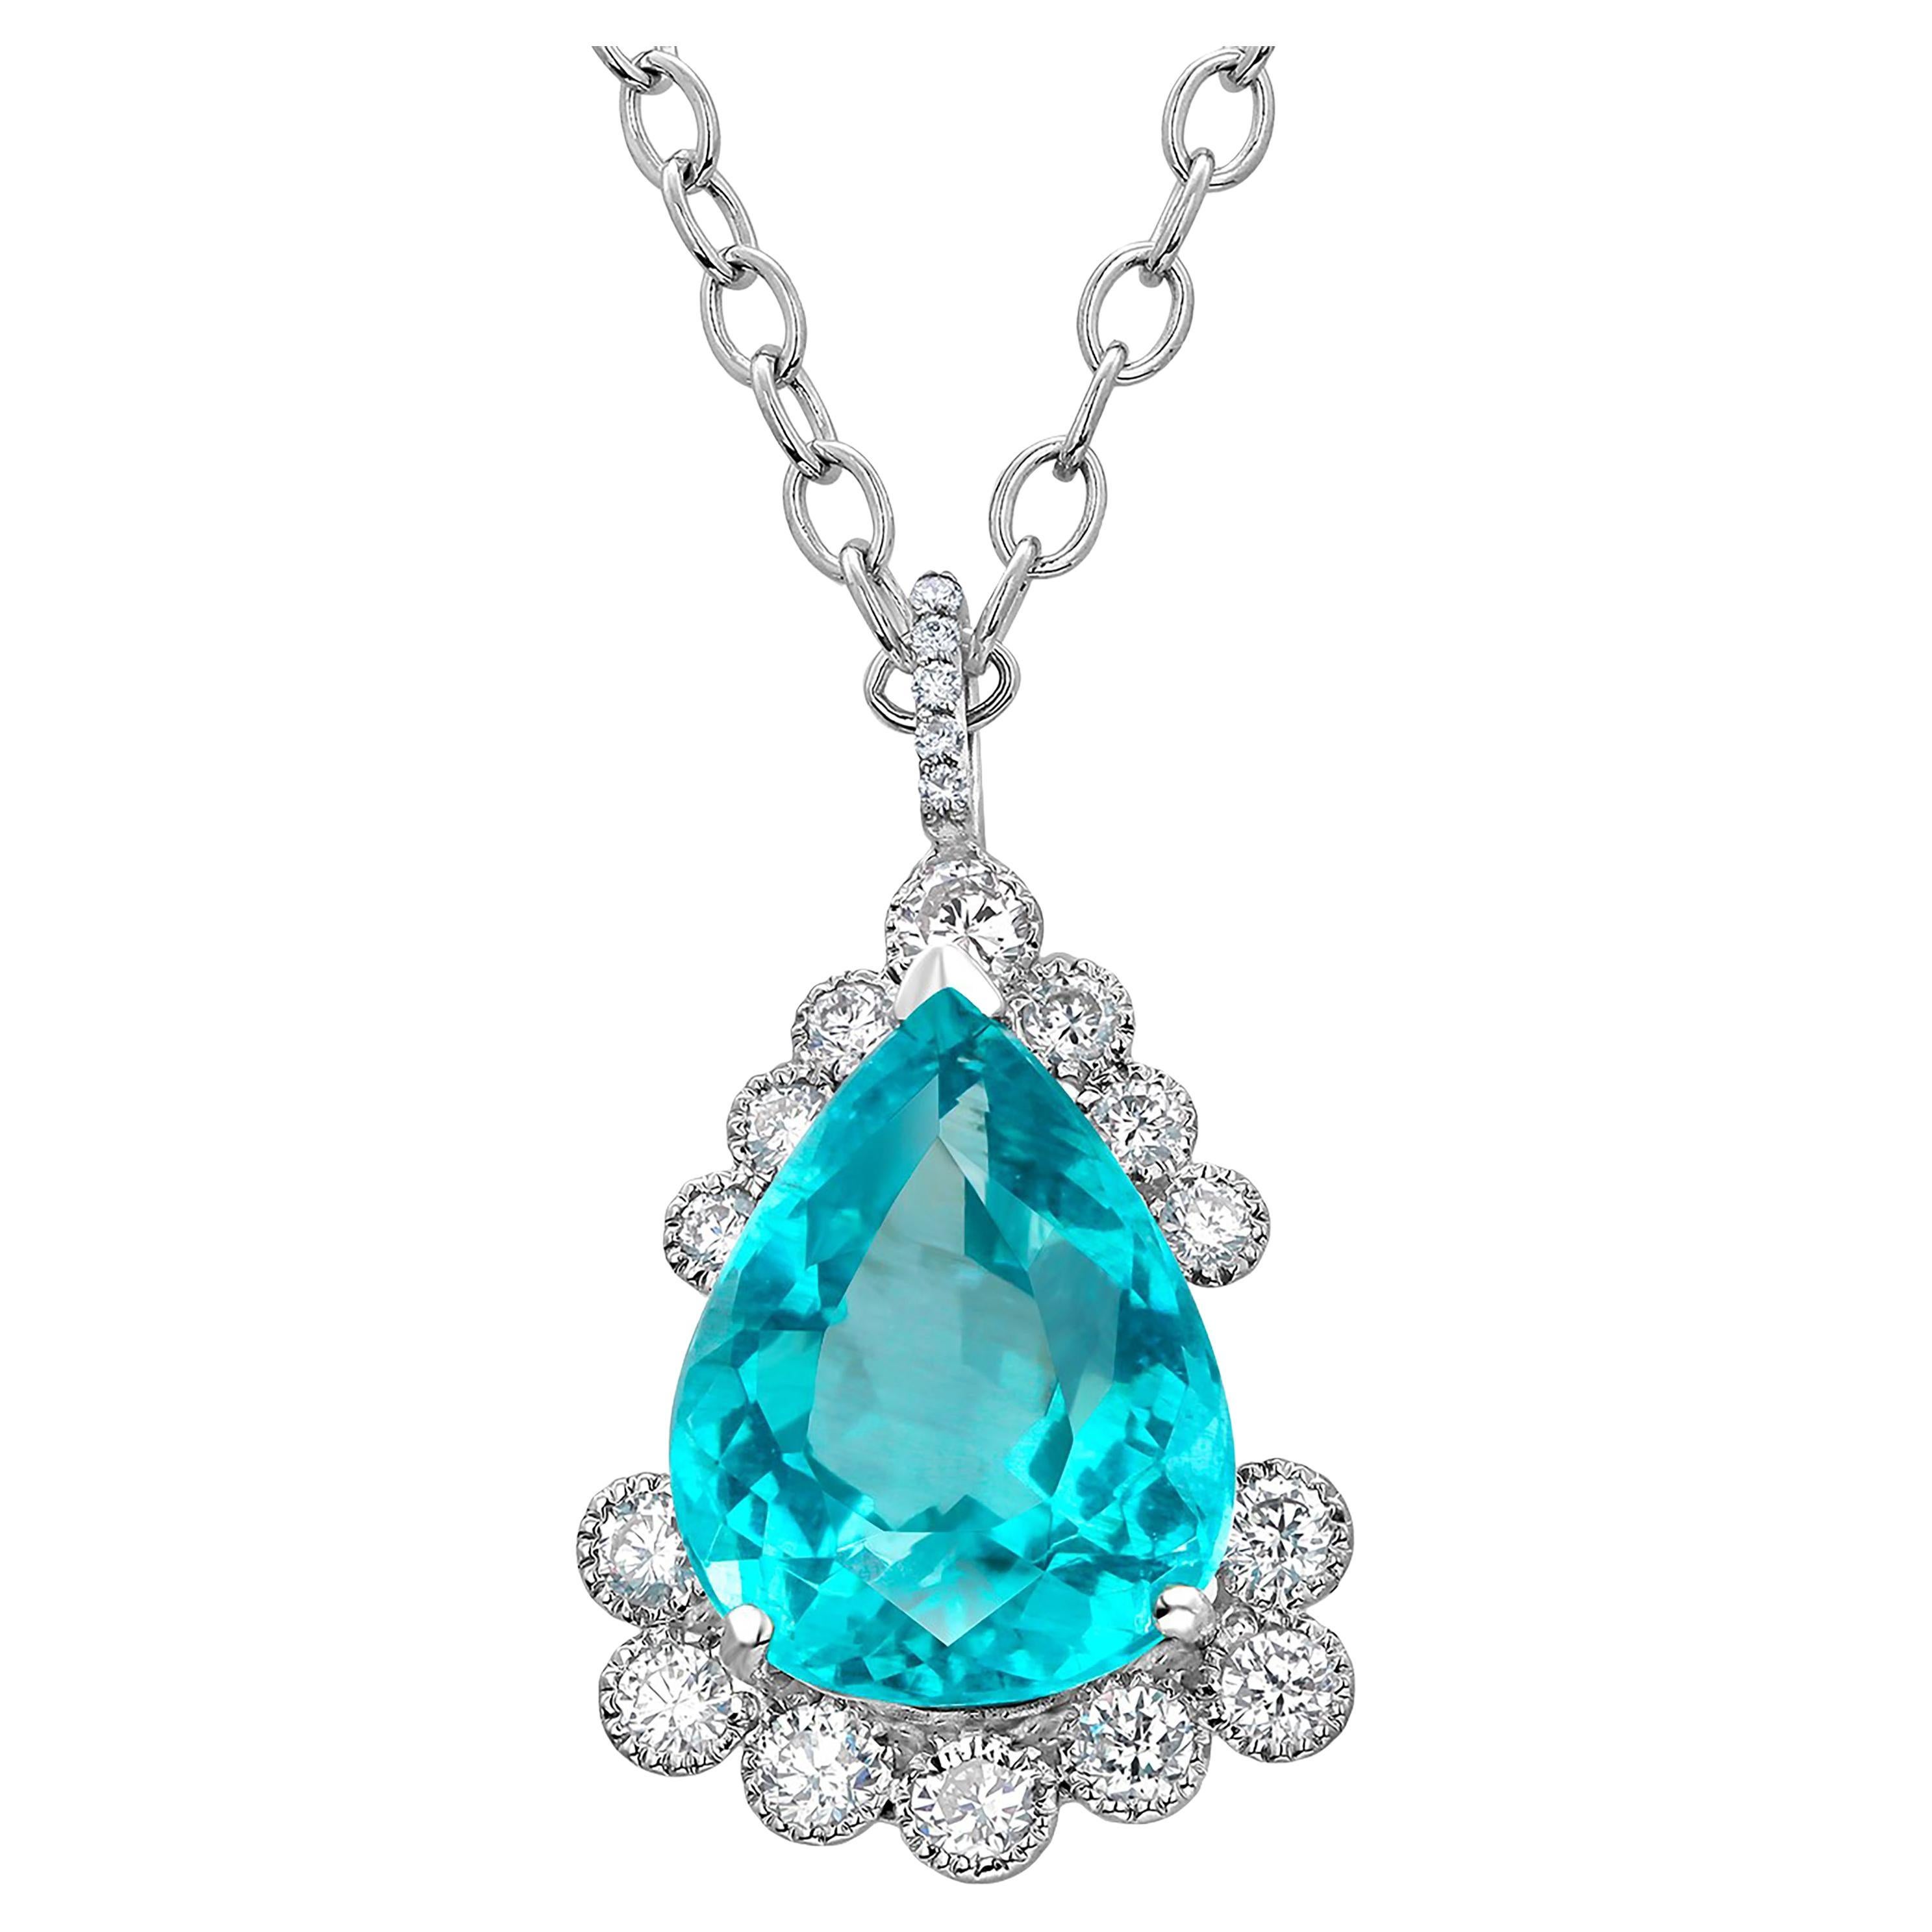 Pear Cut Eighteen Karat White Gold Pear Shaped Apatite and Diamond Pendant Necklace